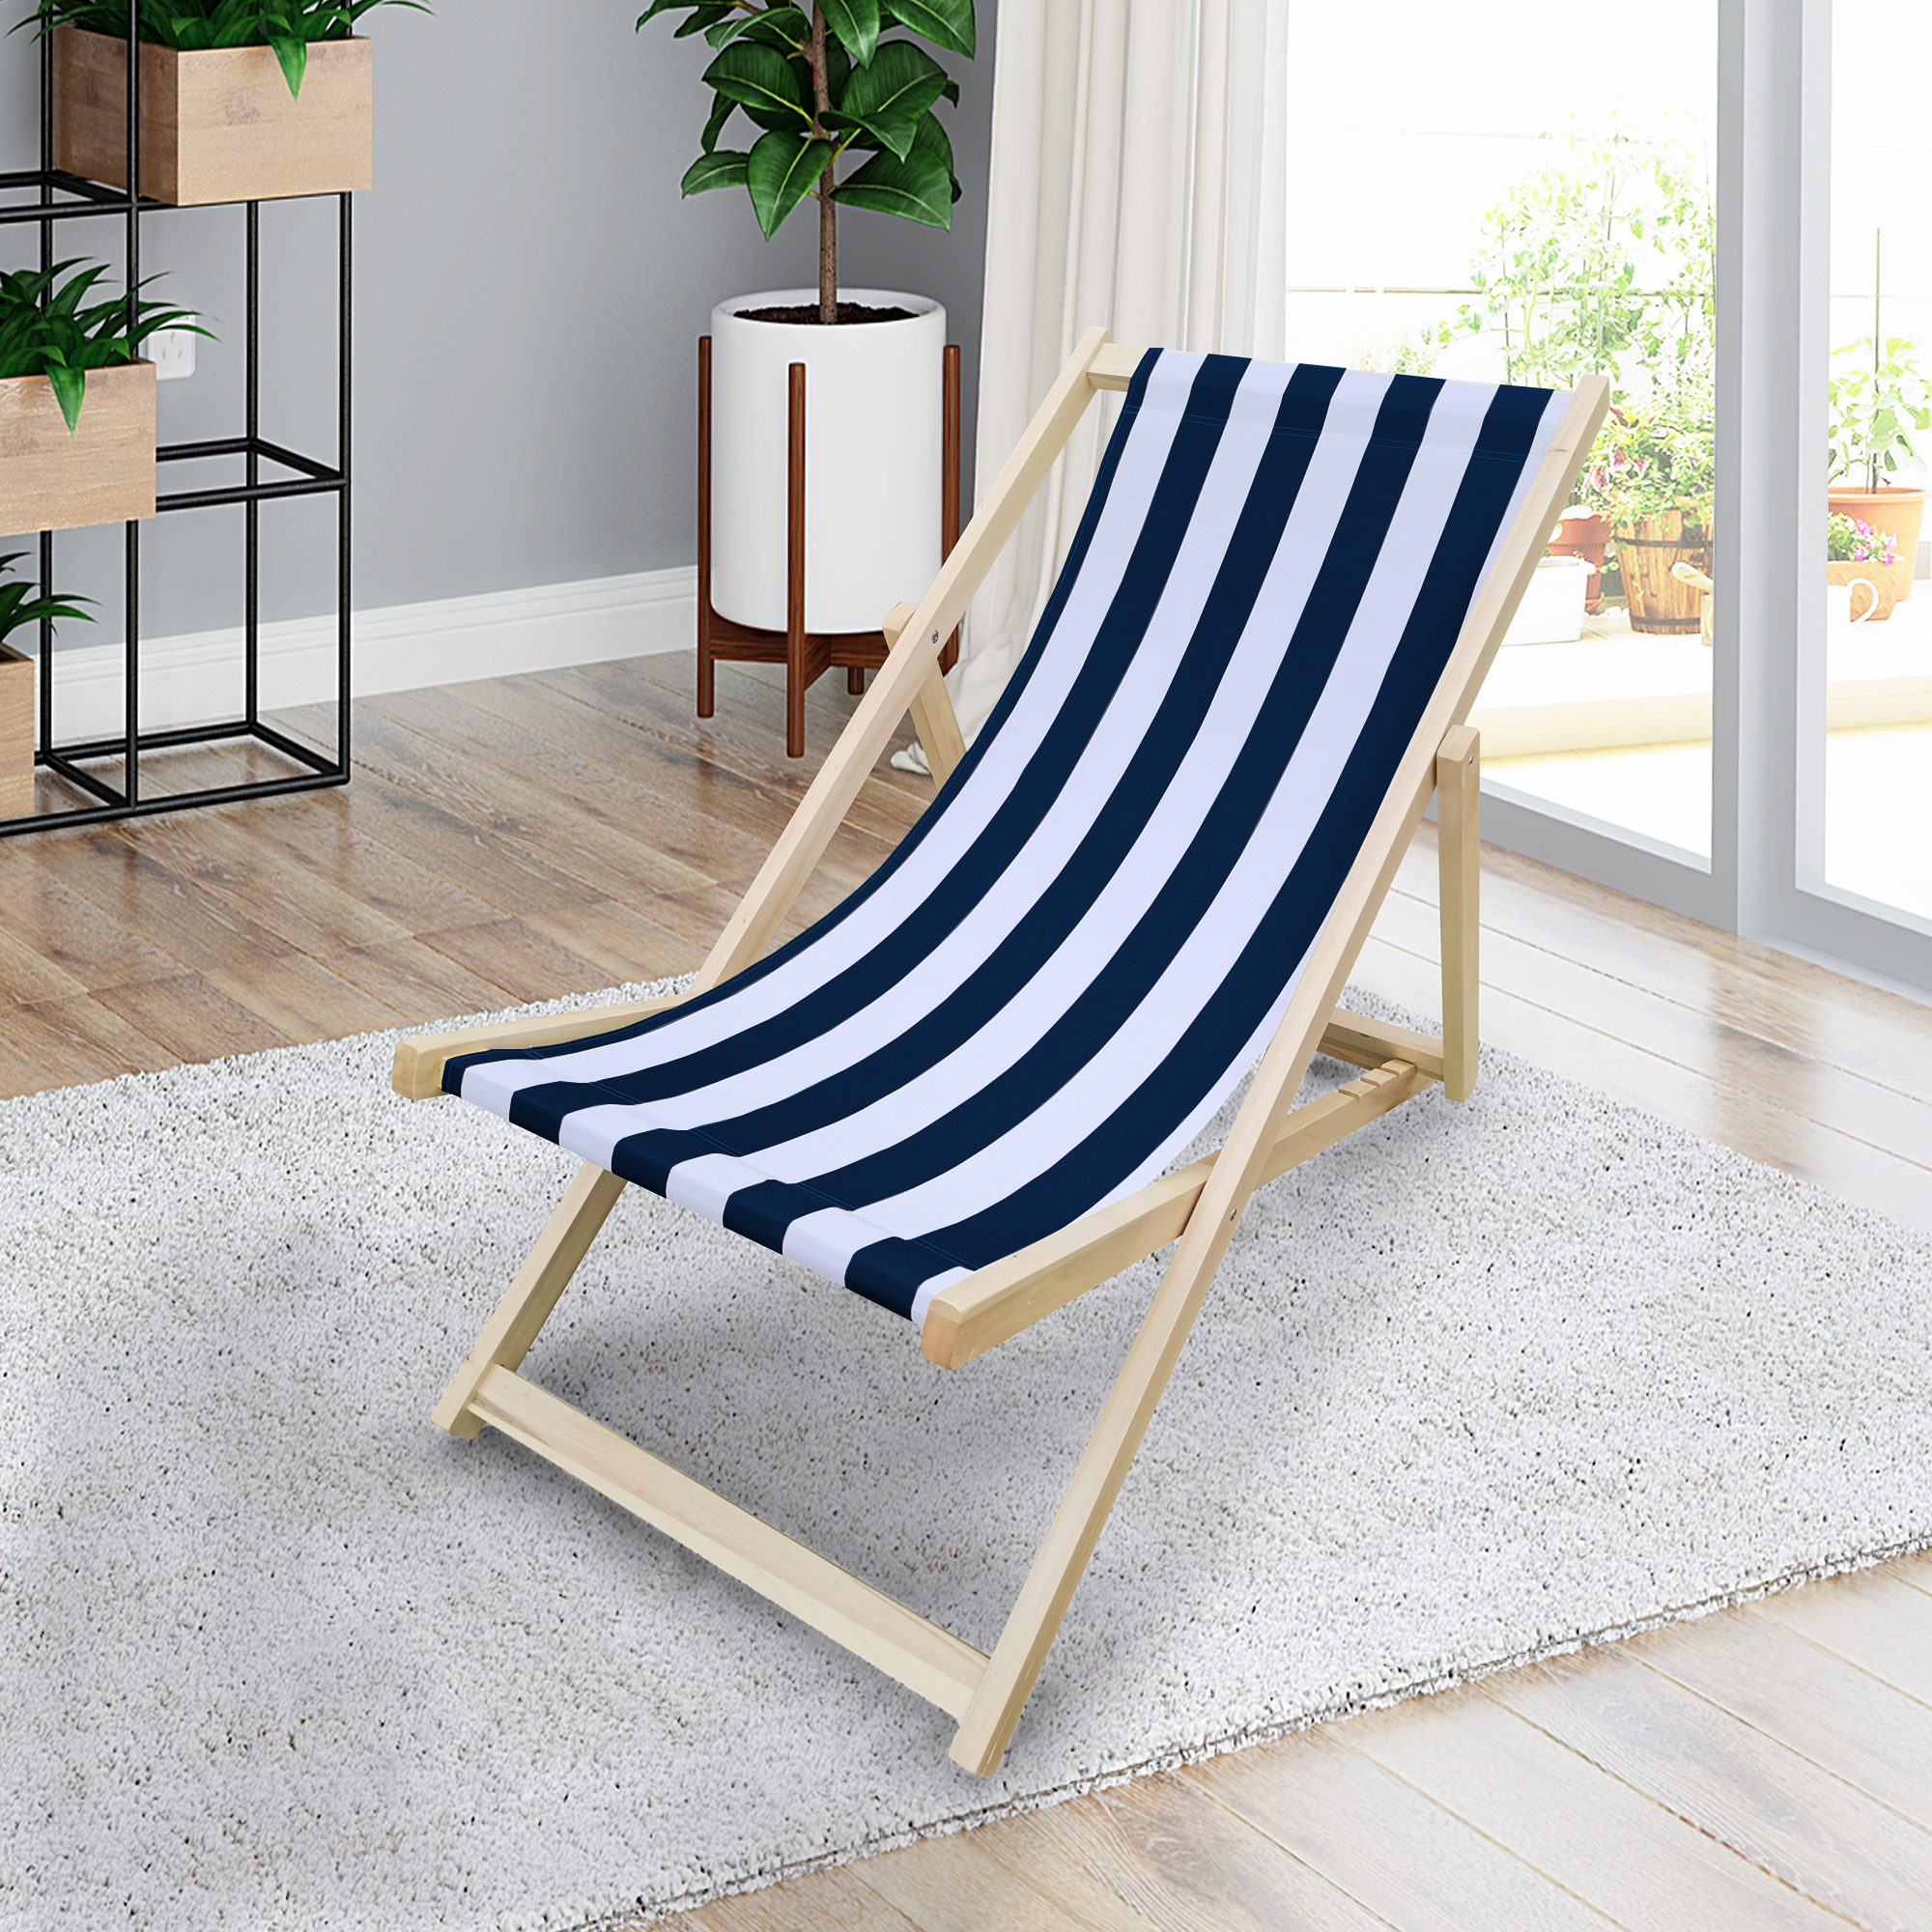 MONSTRUNO Stripe Chaise Lounge Chair - Garden Outdoor Folding Lounge Chairs Wood, Stacking Sling Chaise Lounge, Dark Blue - image 1 of 7